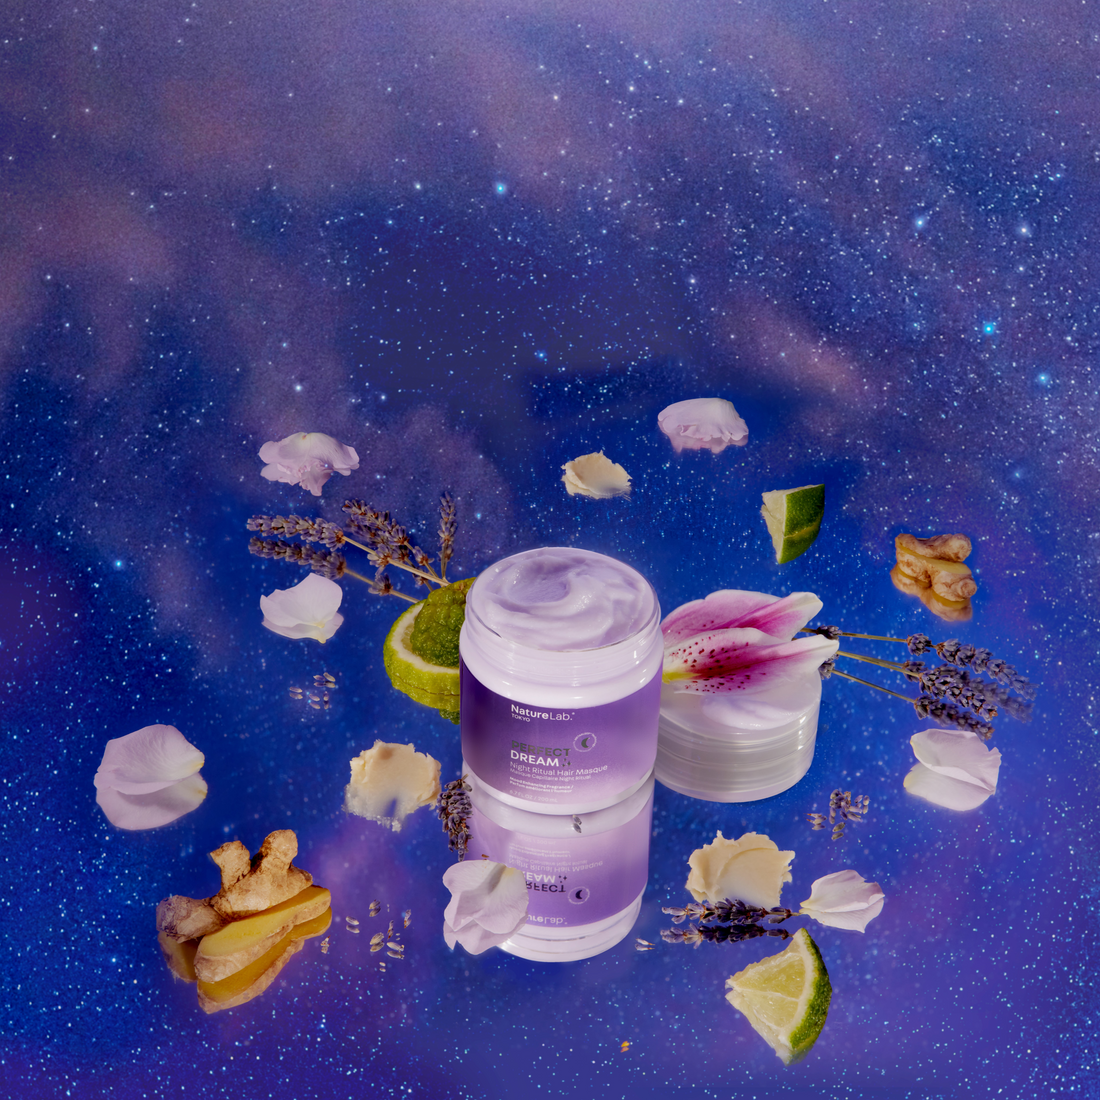 A photo of the Perfect Dream Night Ritual Masque from a high angle, showing much of the top of the jar and the masque's creamy texture. The jar is surrounded by some of its component ingredients: pieces of ginger, flower petals, lavender sprigs, and wedges of fruit. The surface beneath all of these items is a wide expanse of a starry sky pattern, mostly cobalt blue with some faded purple galaxy clouds at the edges. The effect is dreamy and ethereal.